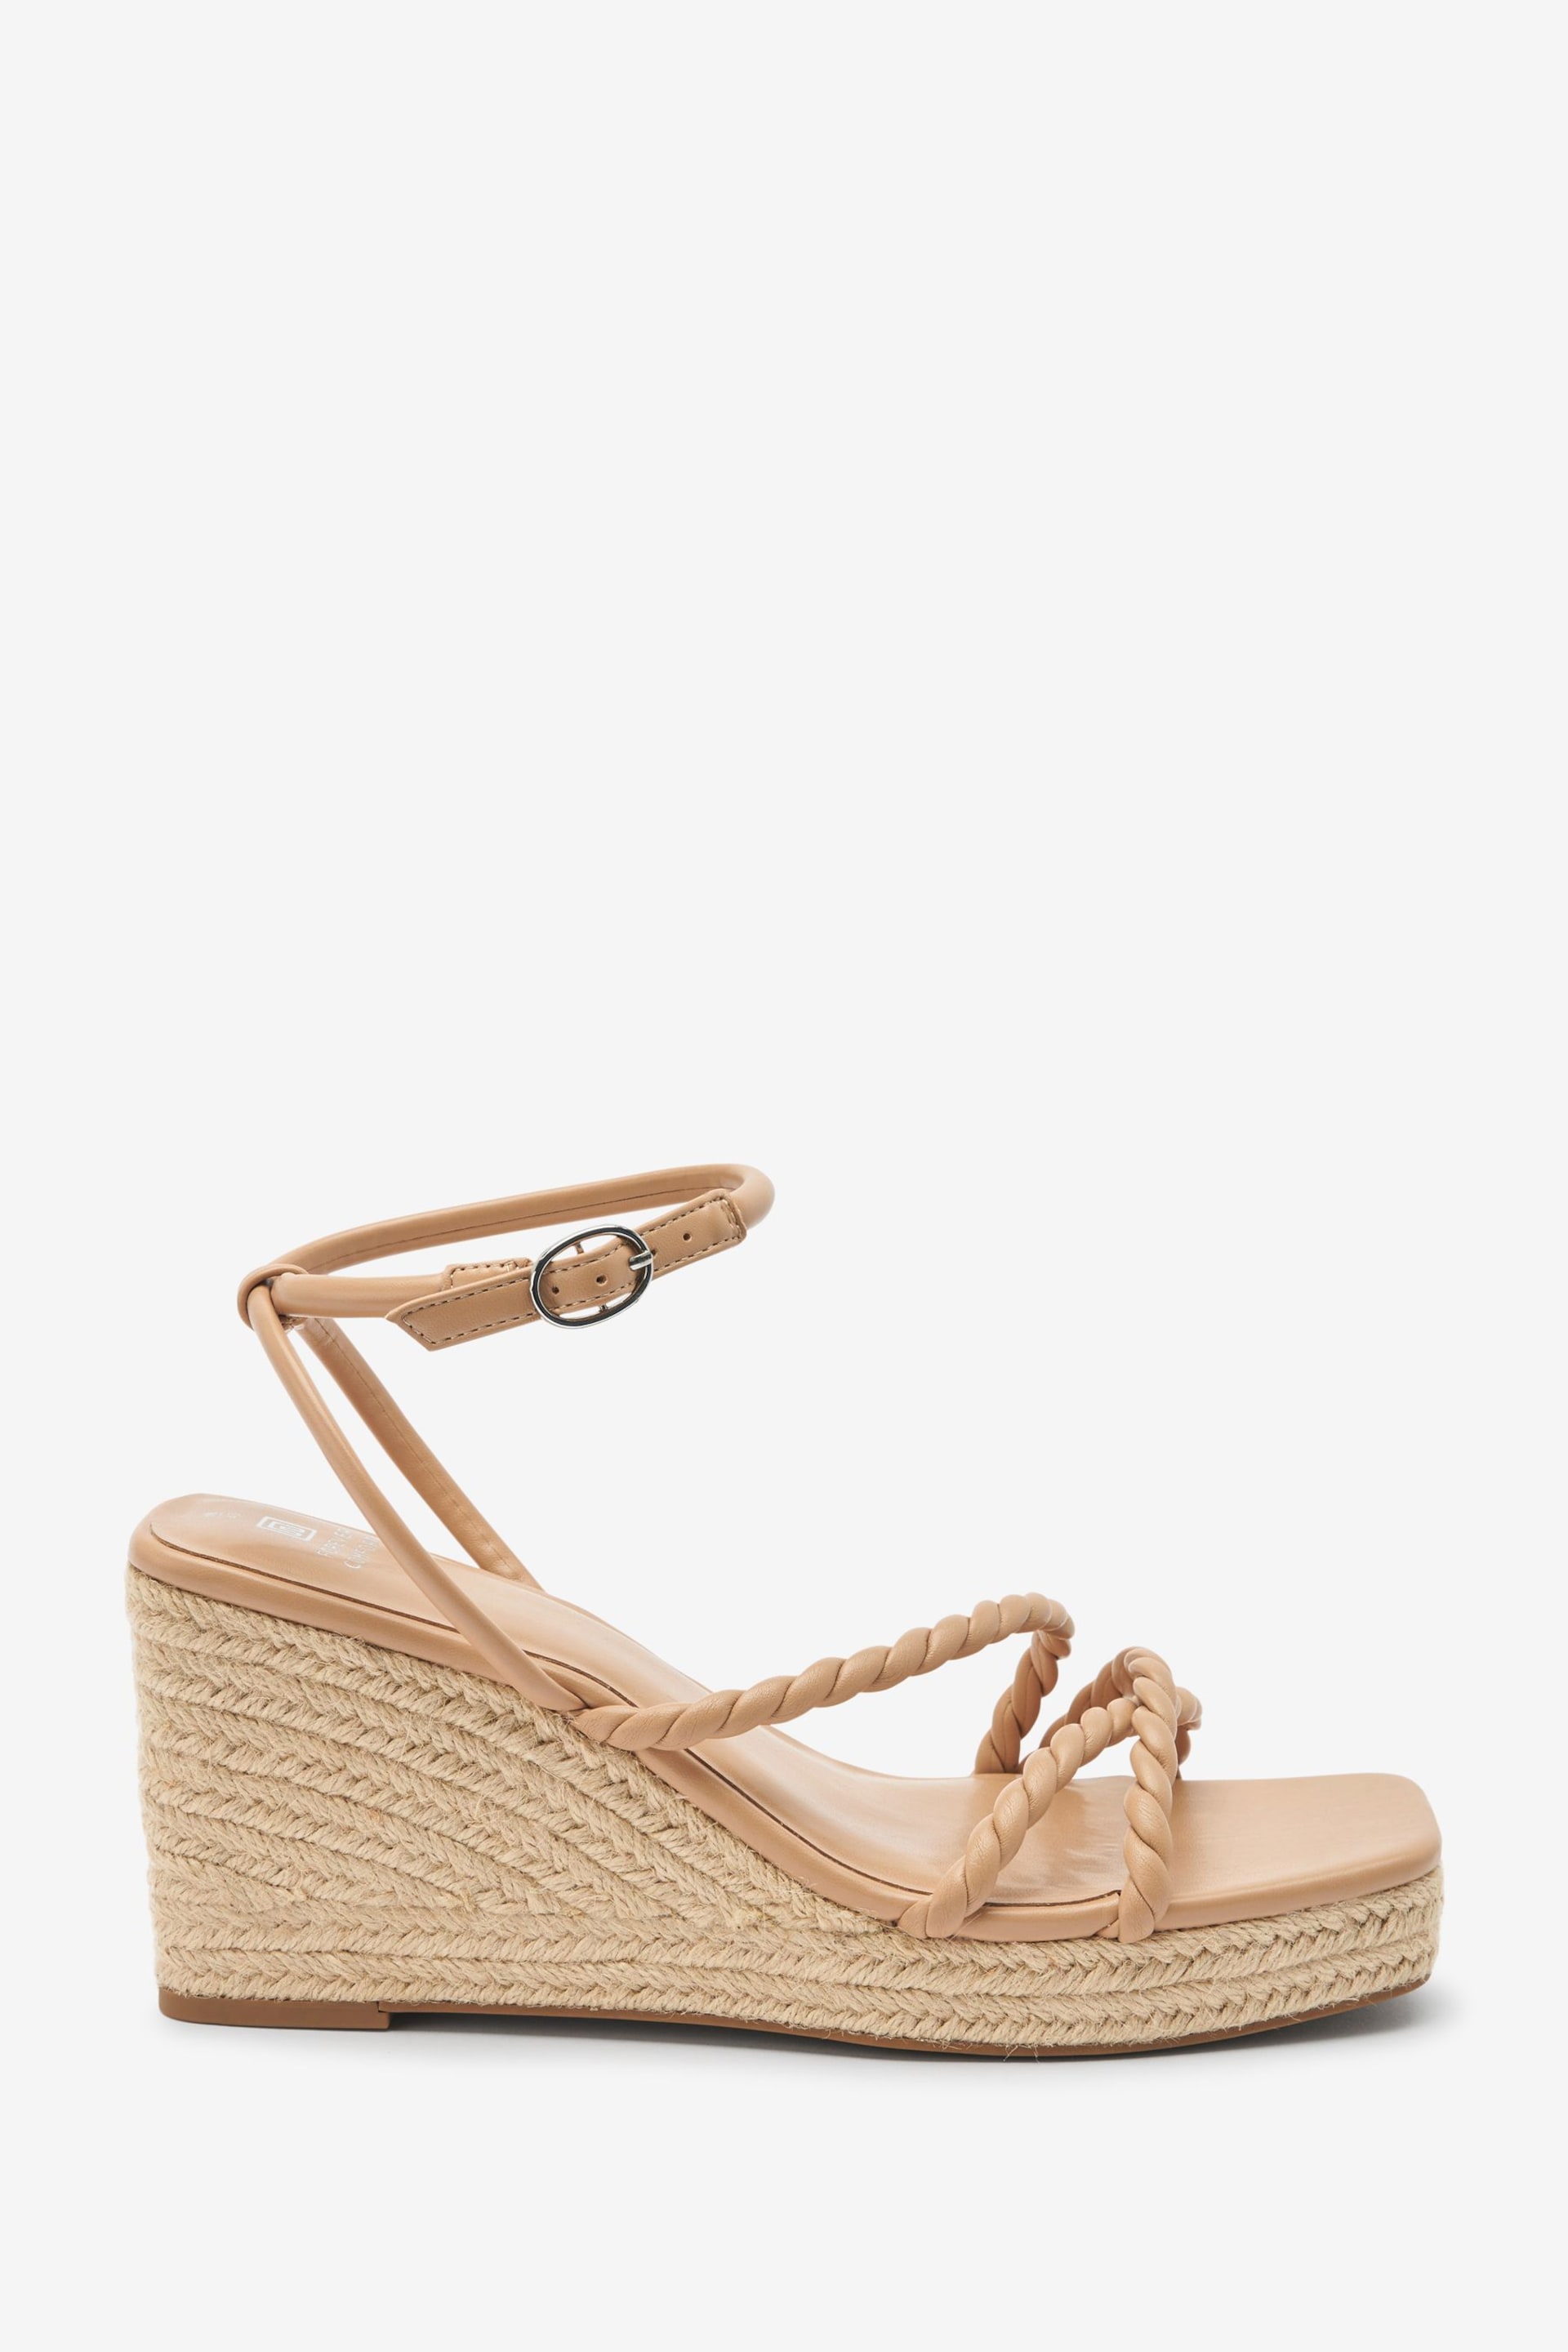 Nude Forever Comfort® Twist Strap Detail Square Toe Wedge Sandals - Image 3 of 6